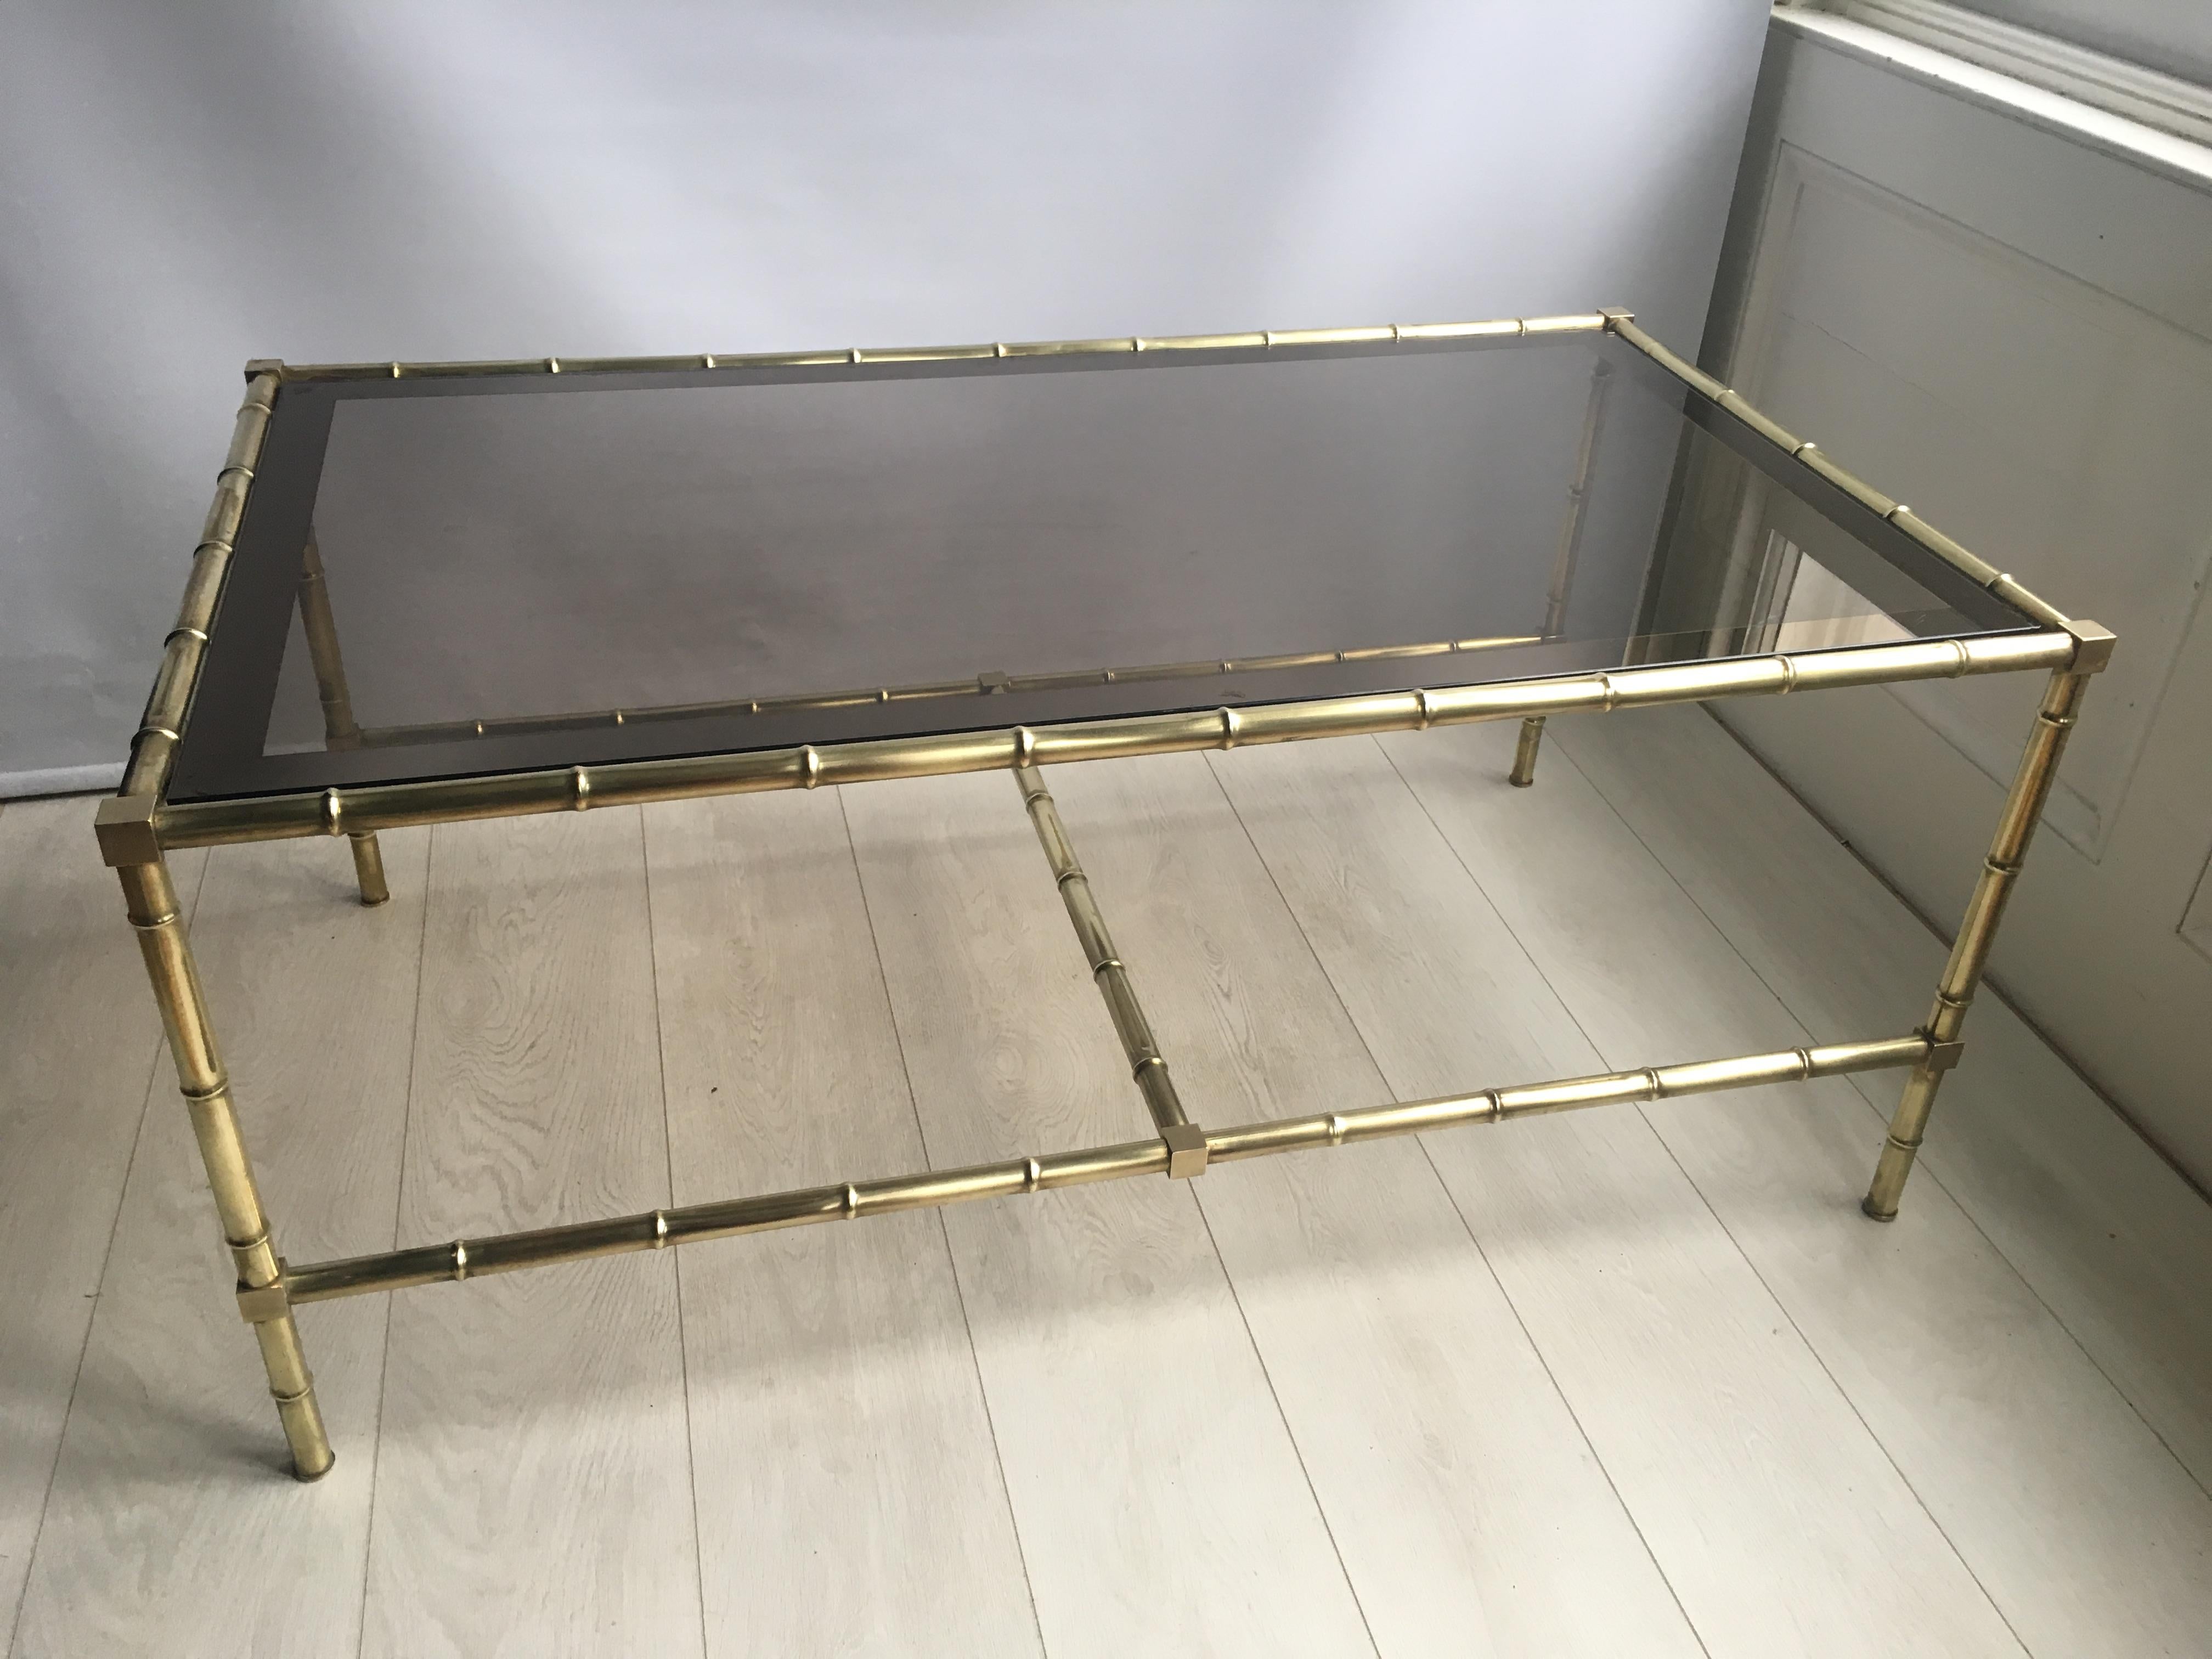 Fantastic faux bamboo coffee table from France, circa 1970

Polished brass frame with original tinted glass top

Great size at 115.5 cm by 65.5 cm and stands 50 cm tall.